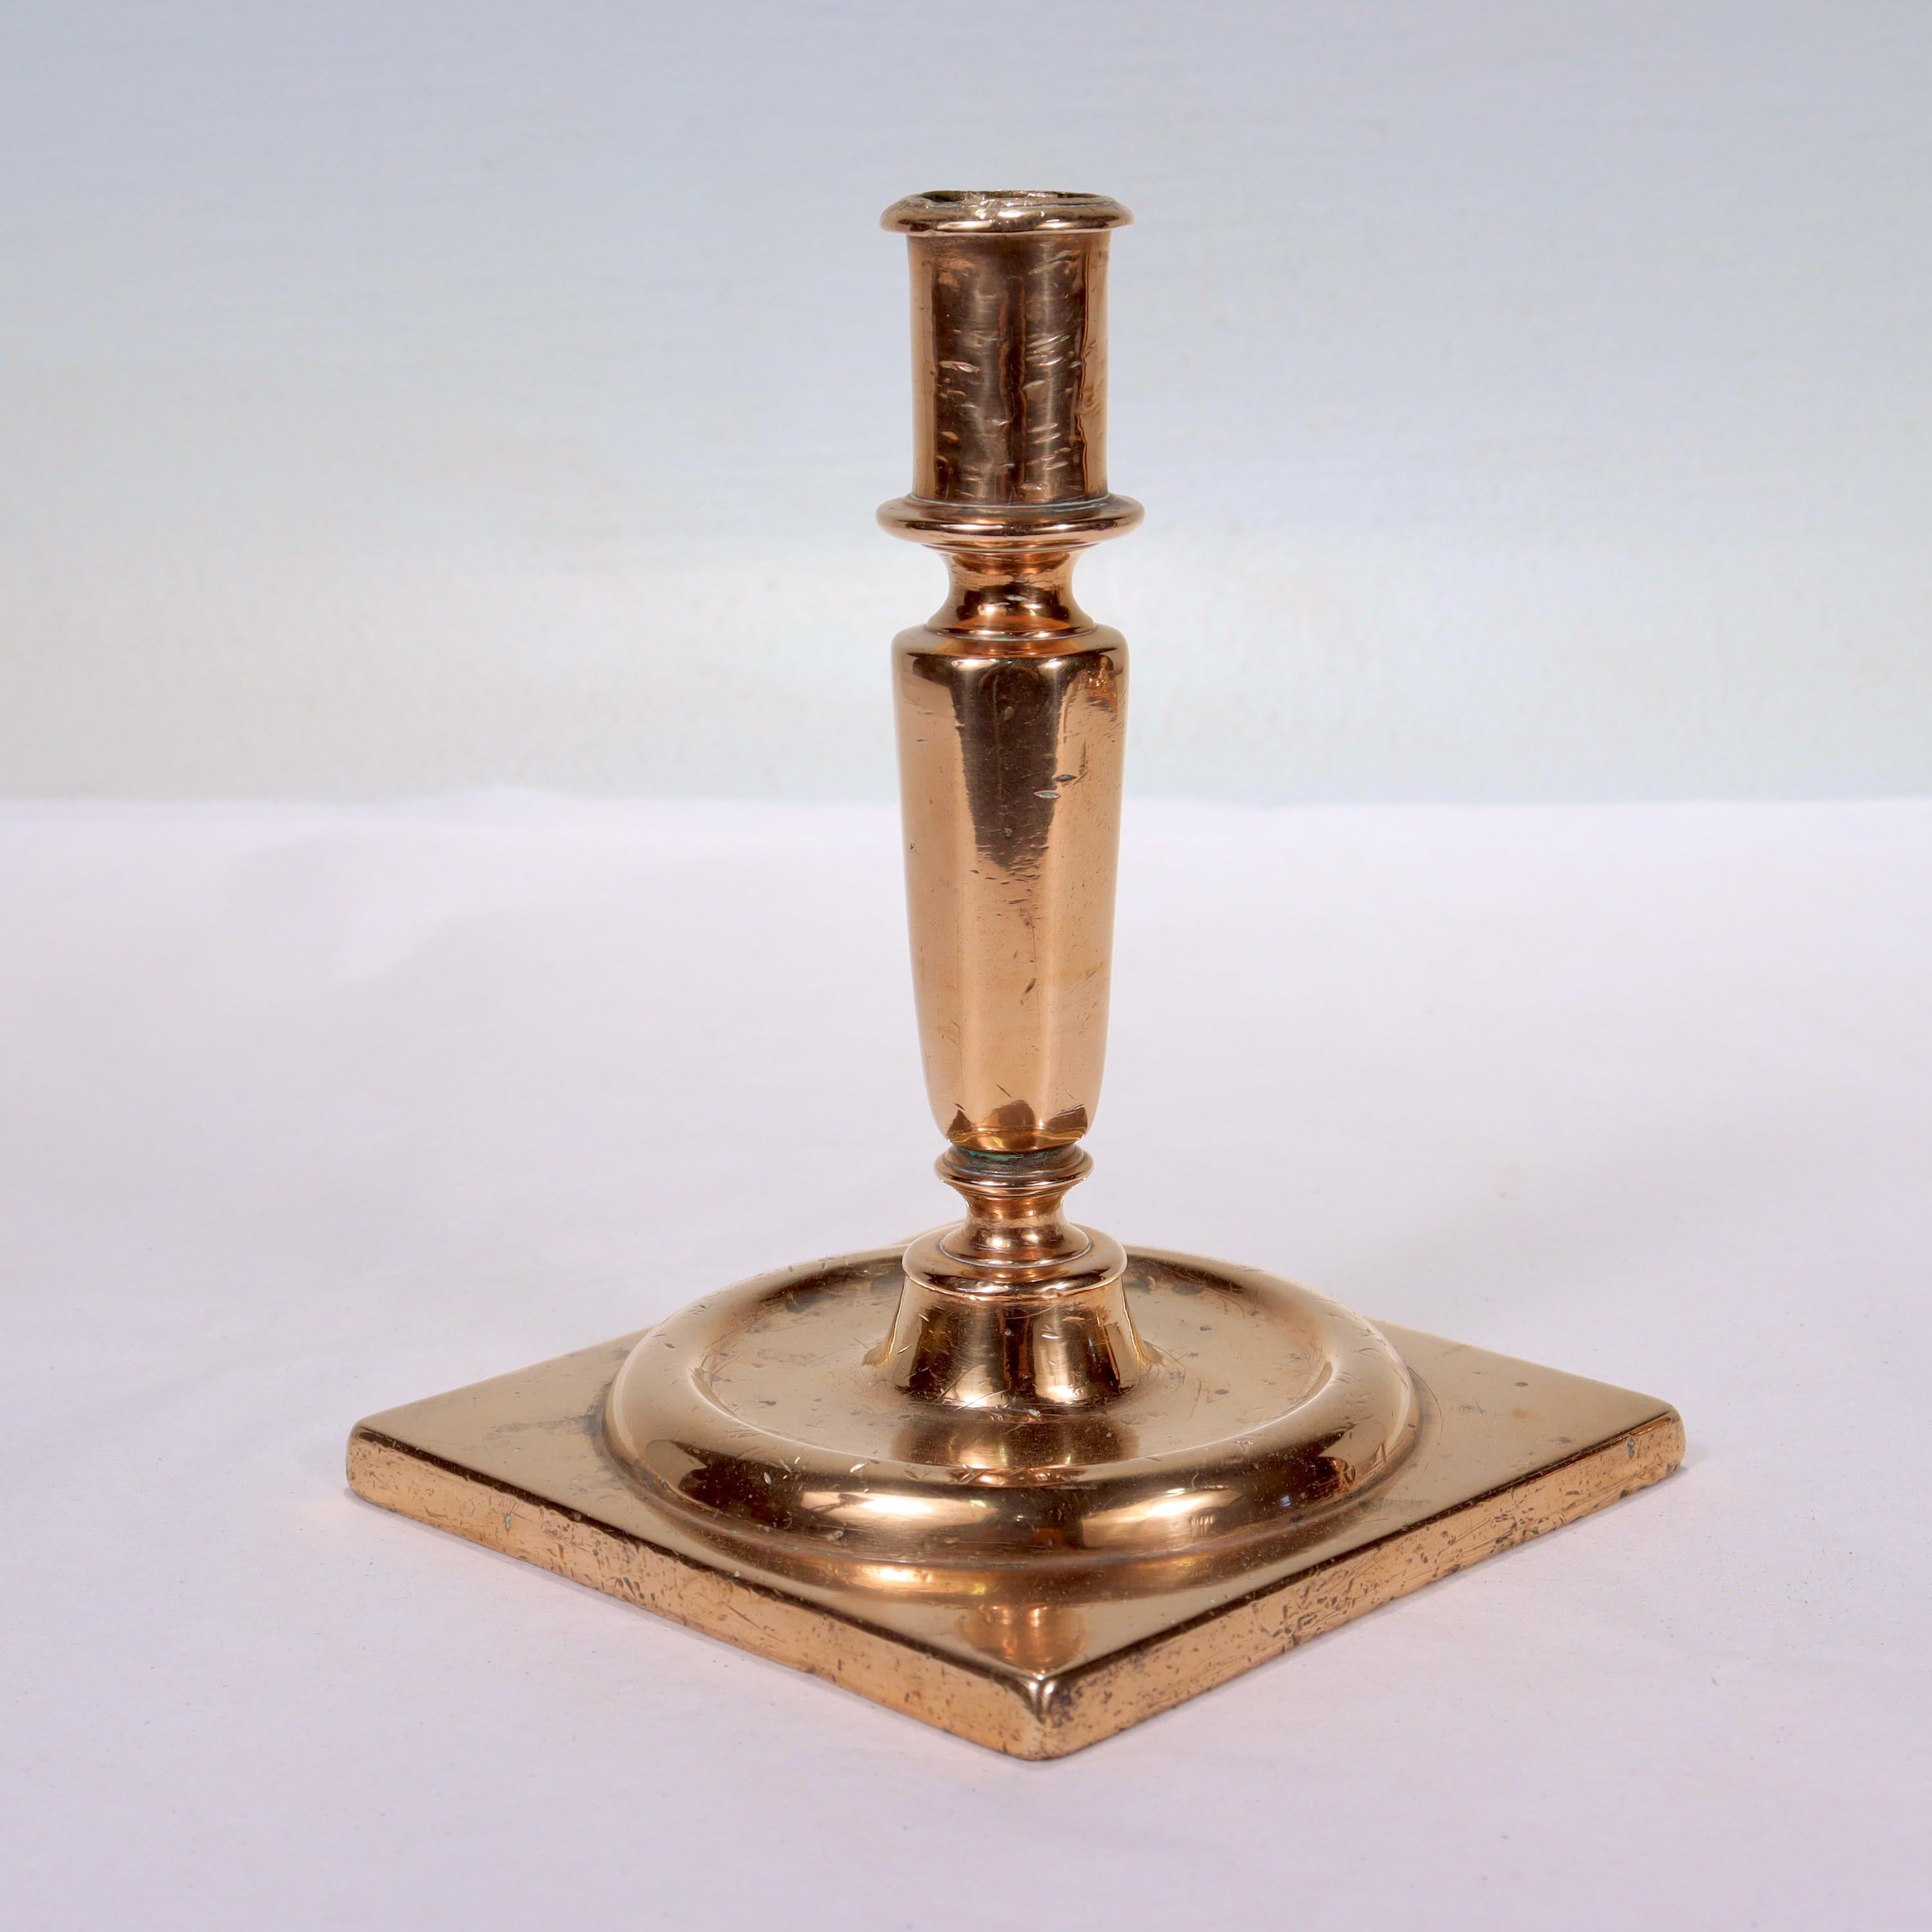 Baroque Antique 17th Century Dutch or English Bronze Candlestick/Candleholder For Sale